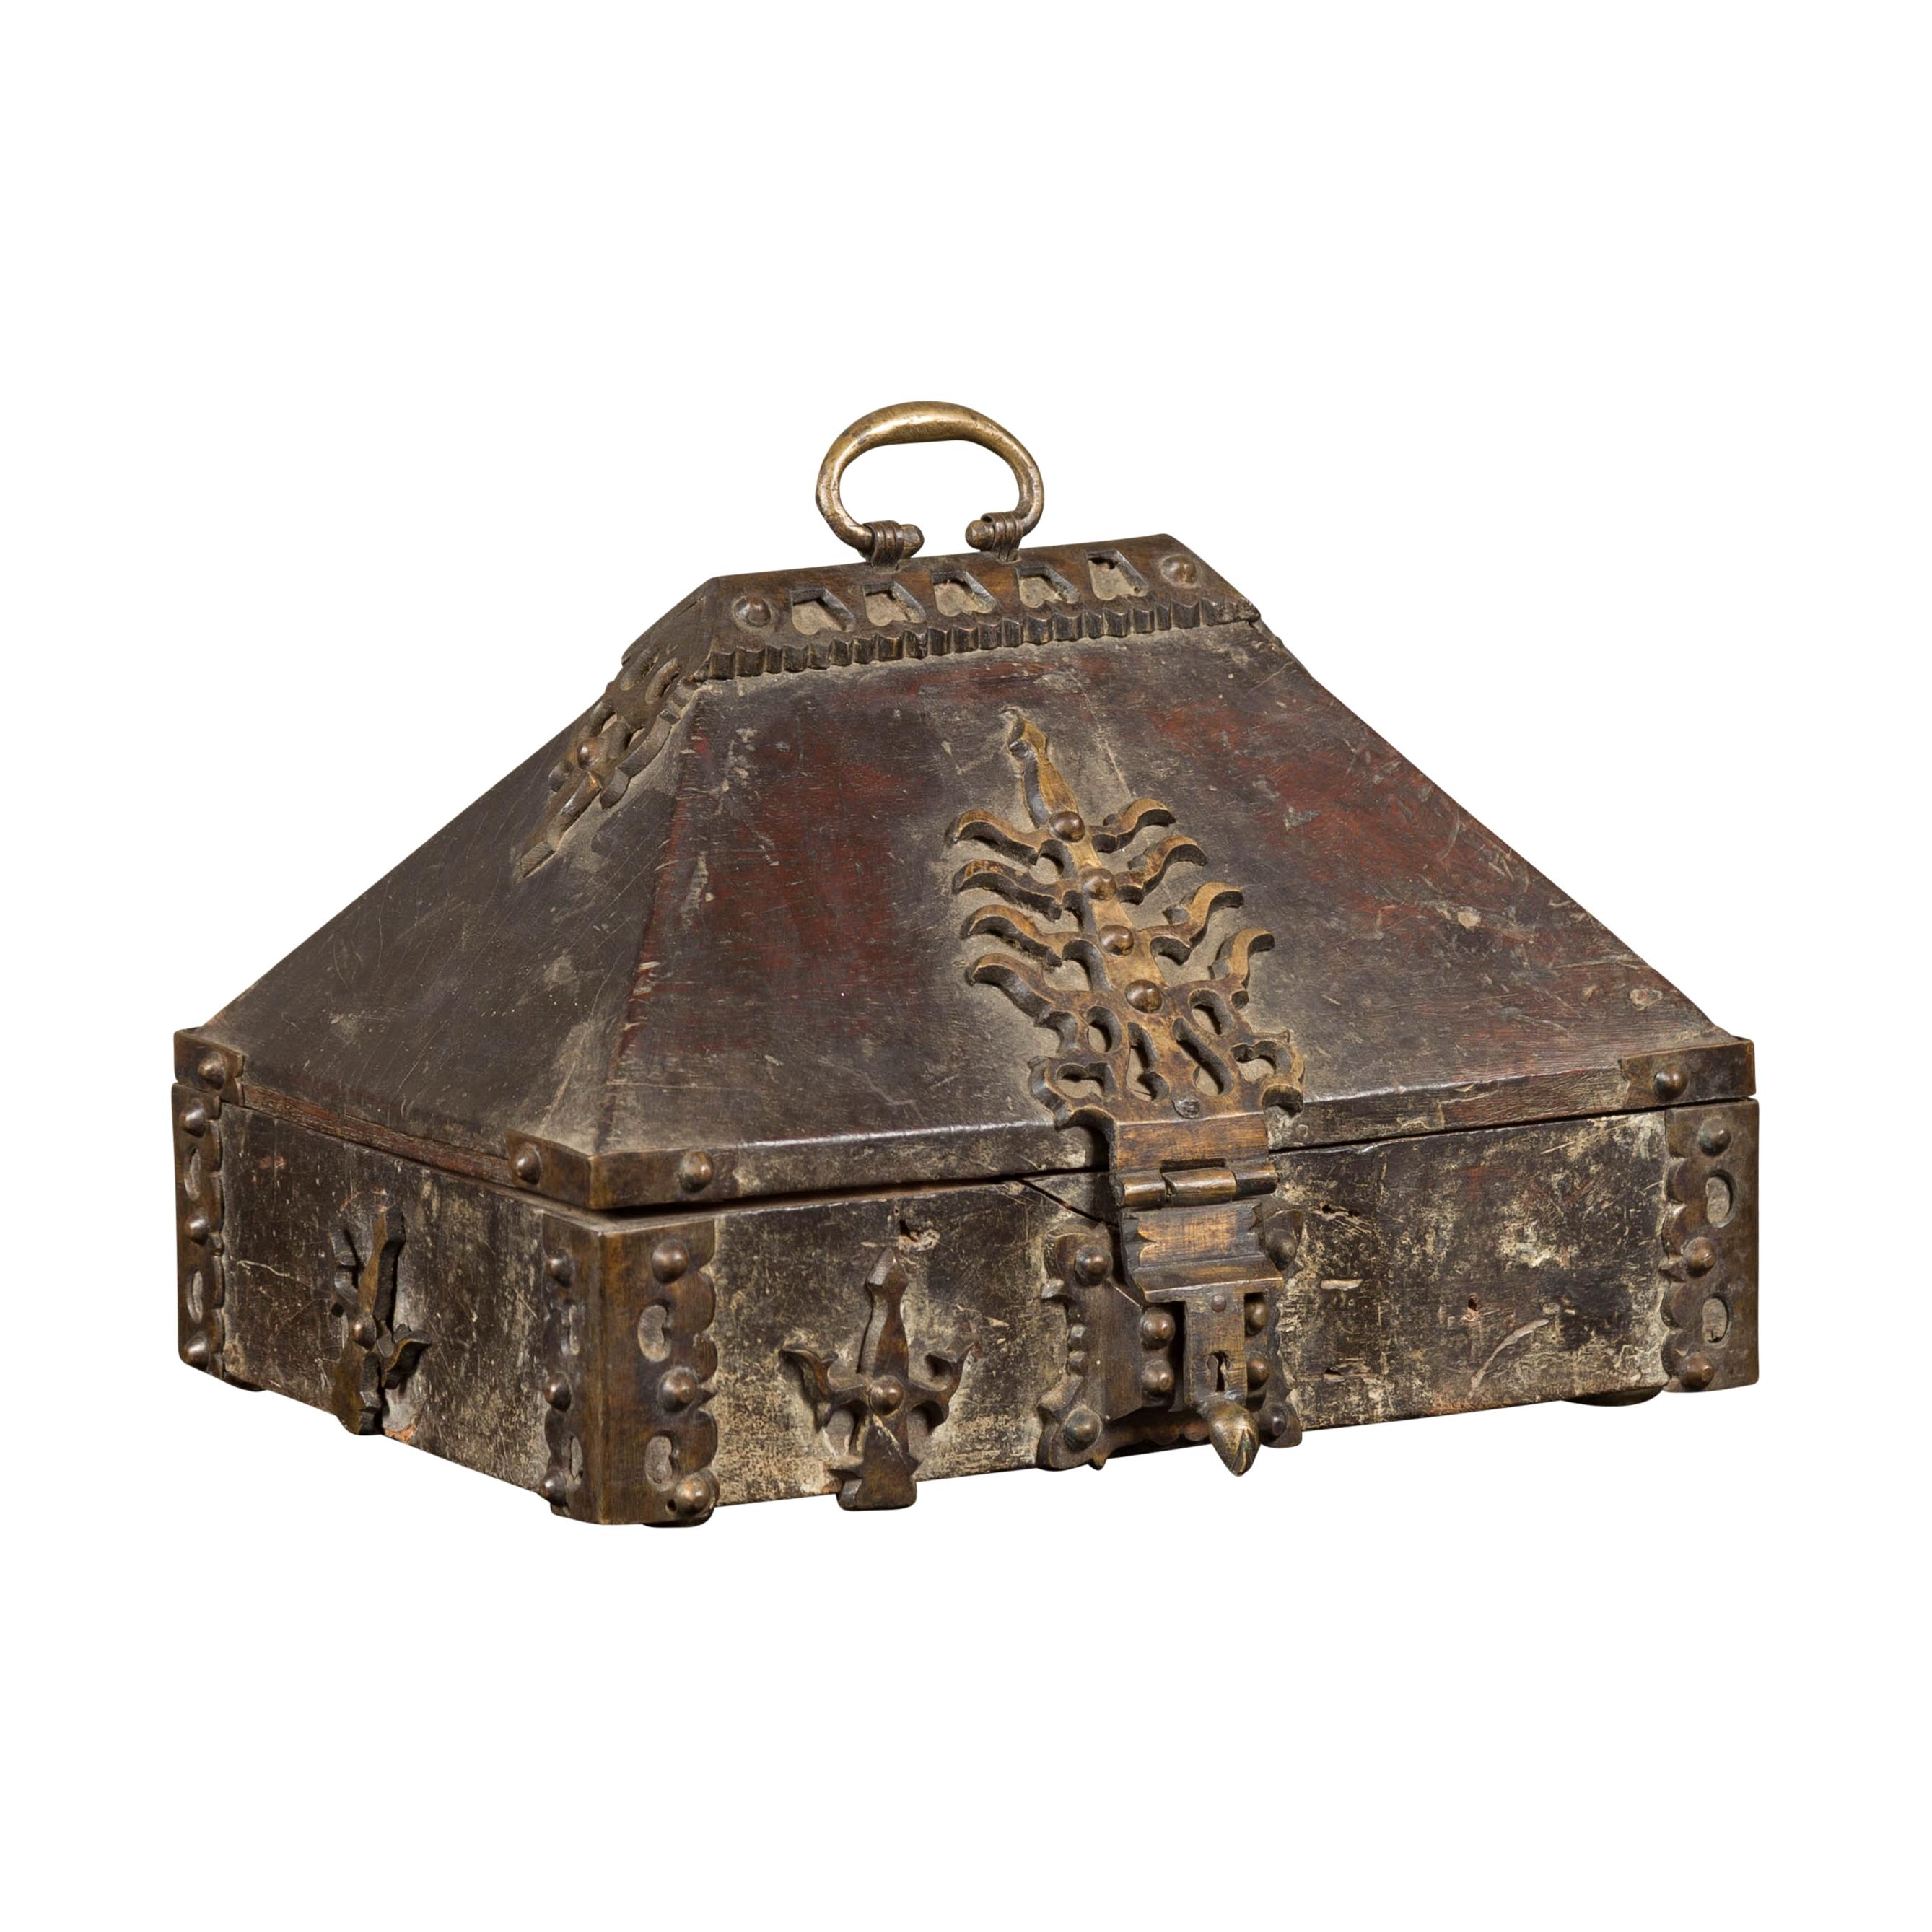 Antique Indian Treasure Box Used as Merchant's Chest with Flaming Iron Decor